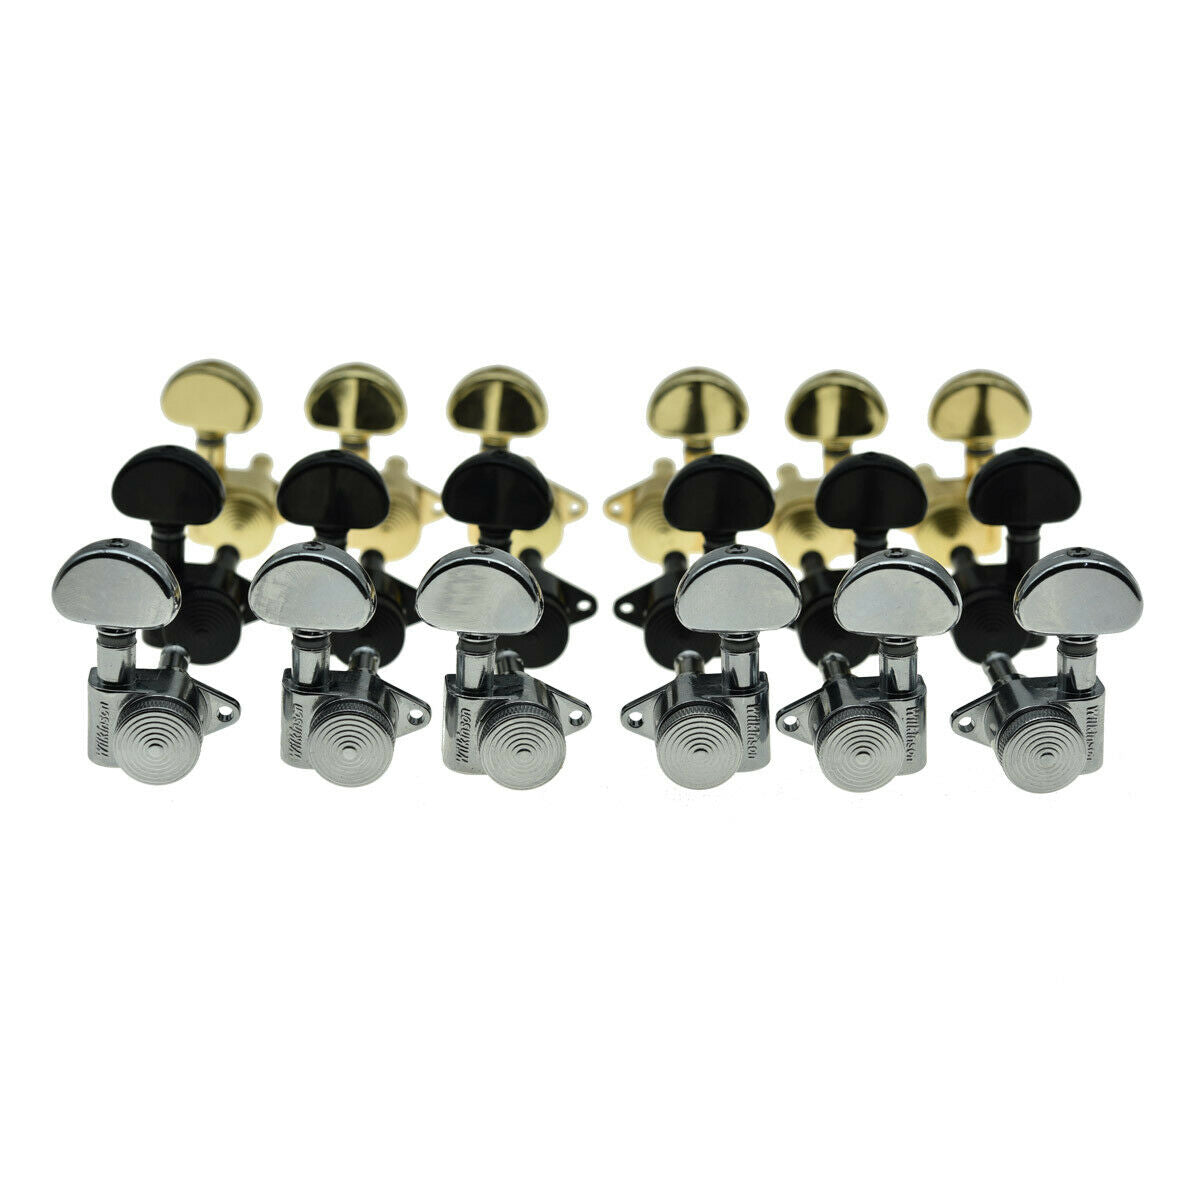 Wilkinson Locking Guitar Tuners 3x3 Tuning Keys for Gibson or Acoustic Chrome